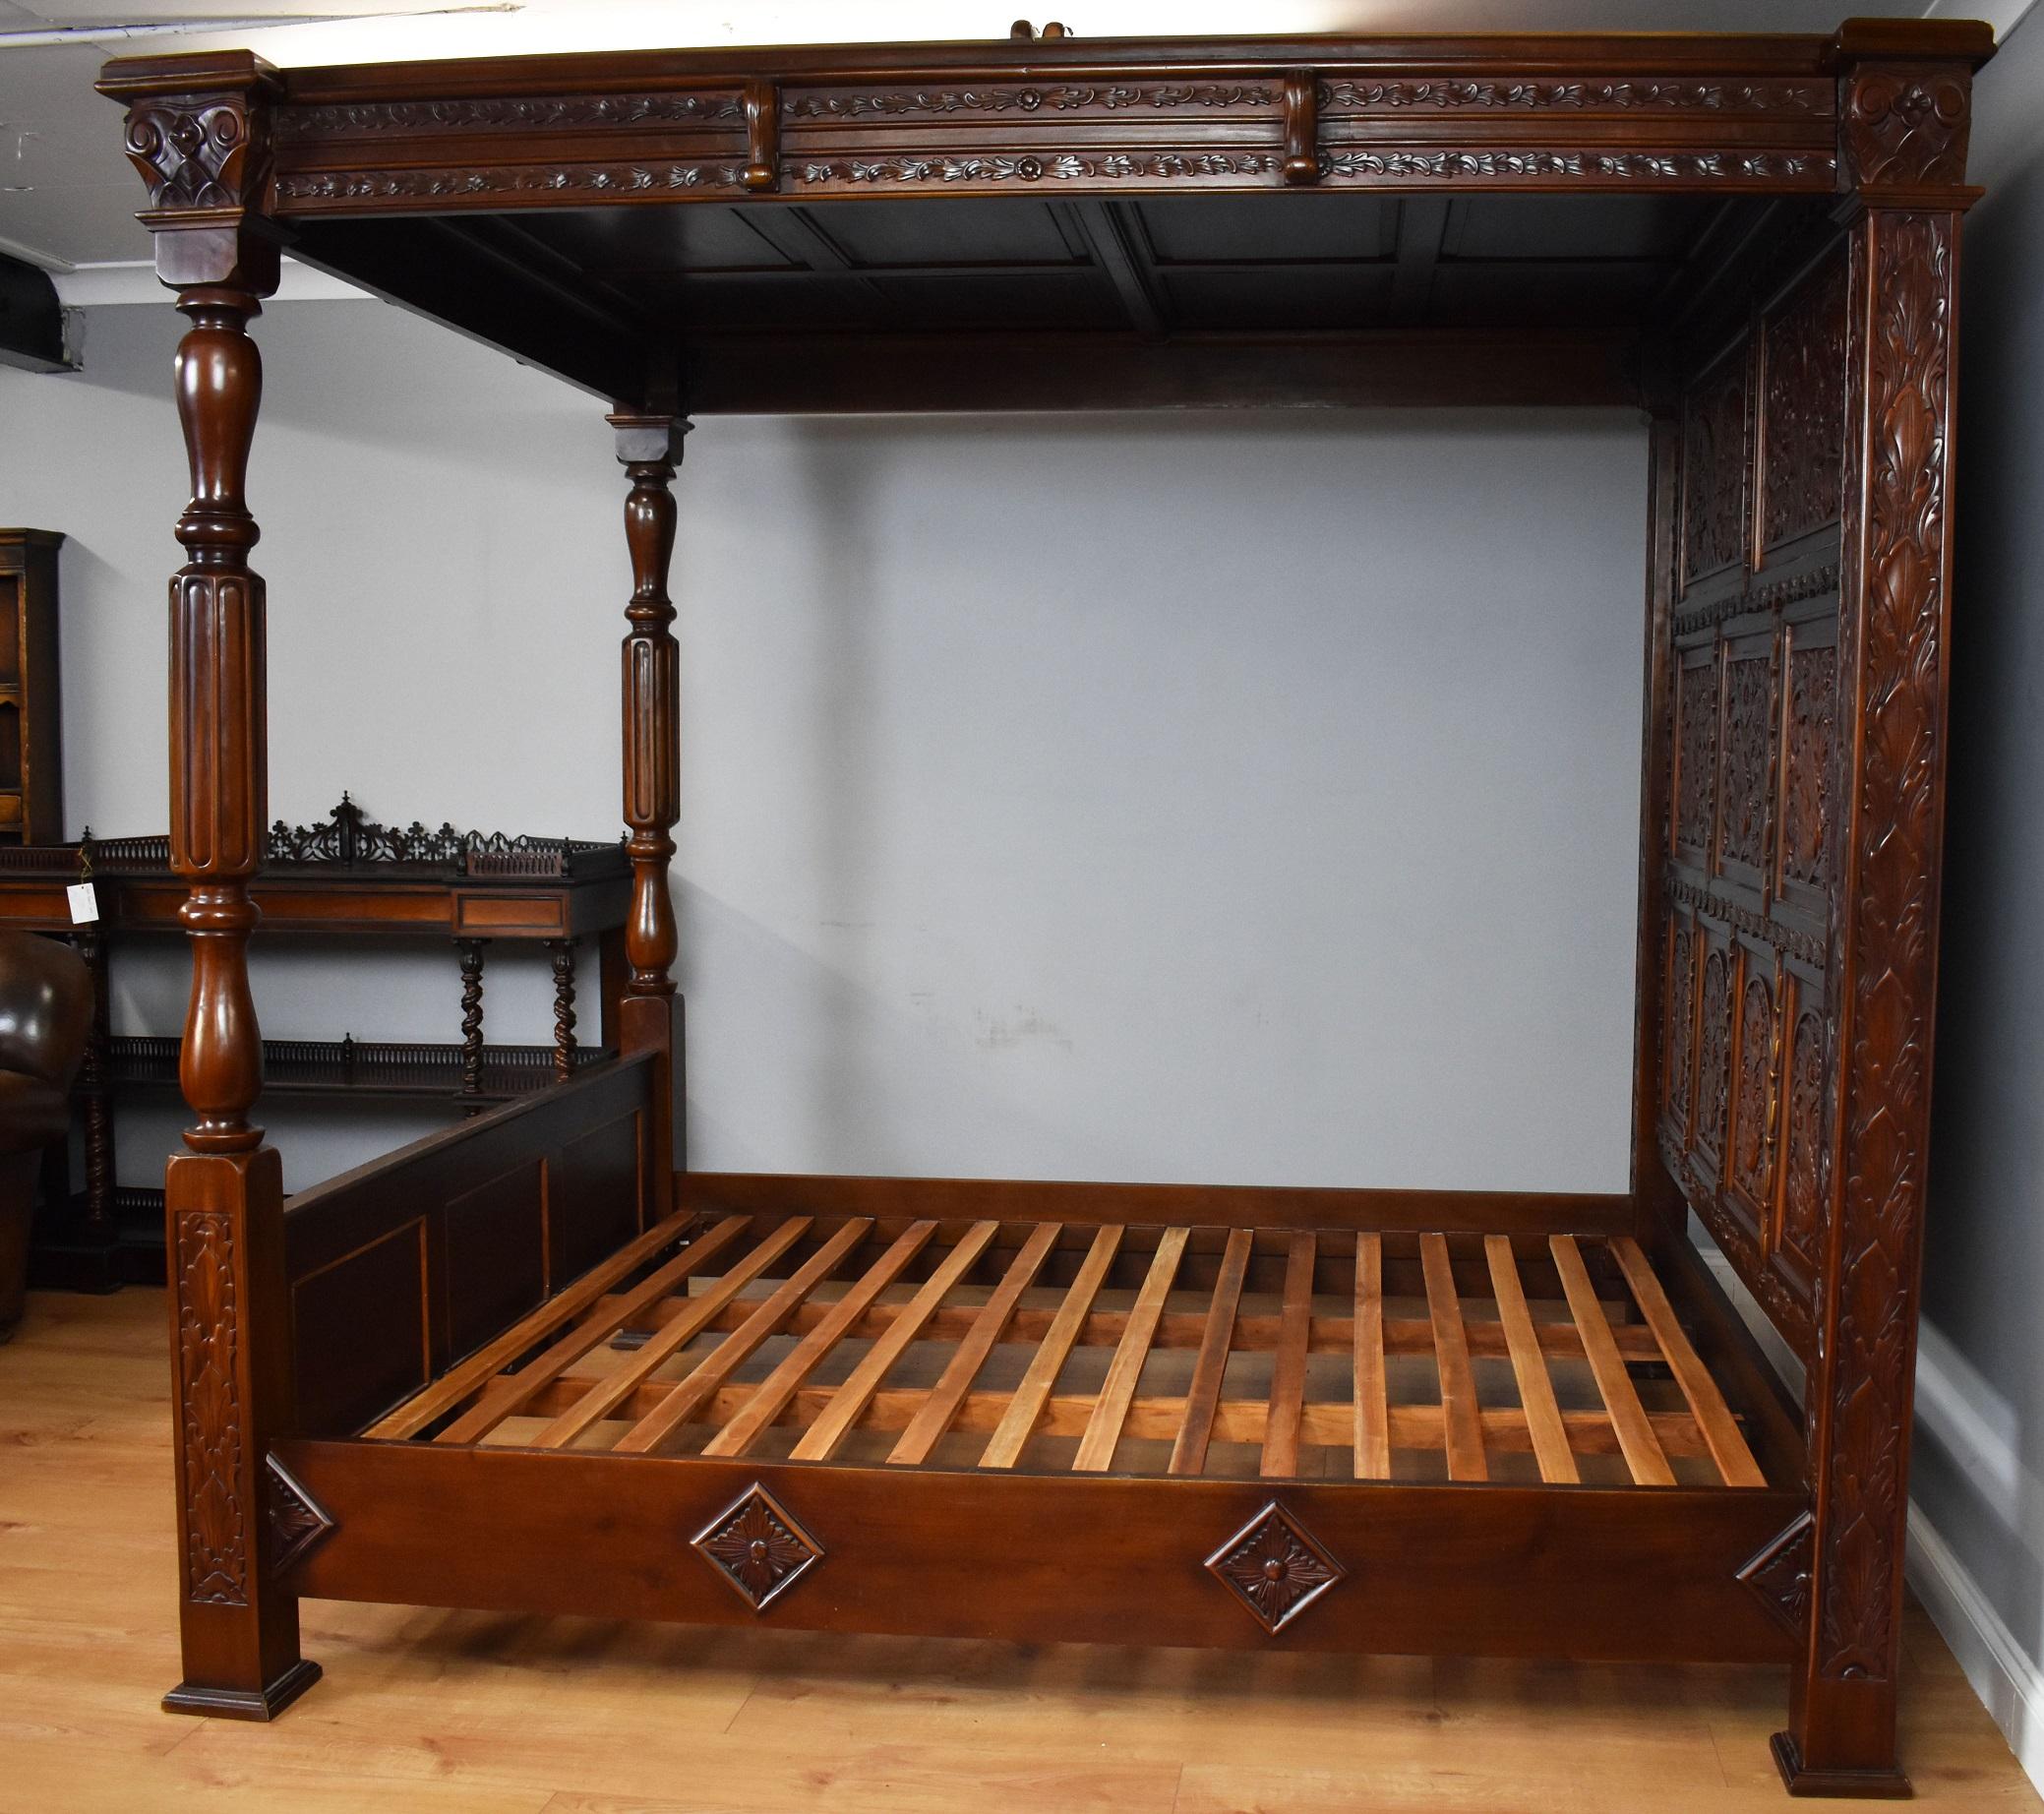 Tudor style mahogany super king size four poster bed in very good condition, with a very nice carved headboard with carved detail to sides and foot board with turned columns to the front. The bed is easily assembled and dismantled.

Overall